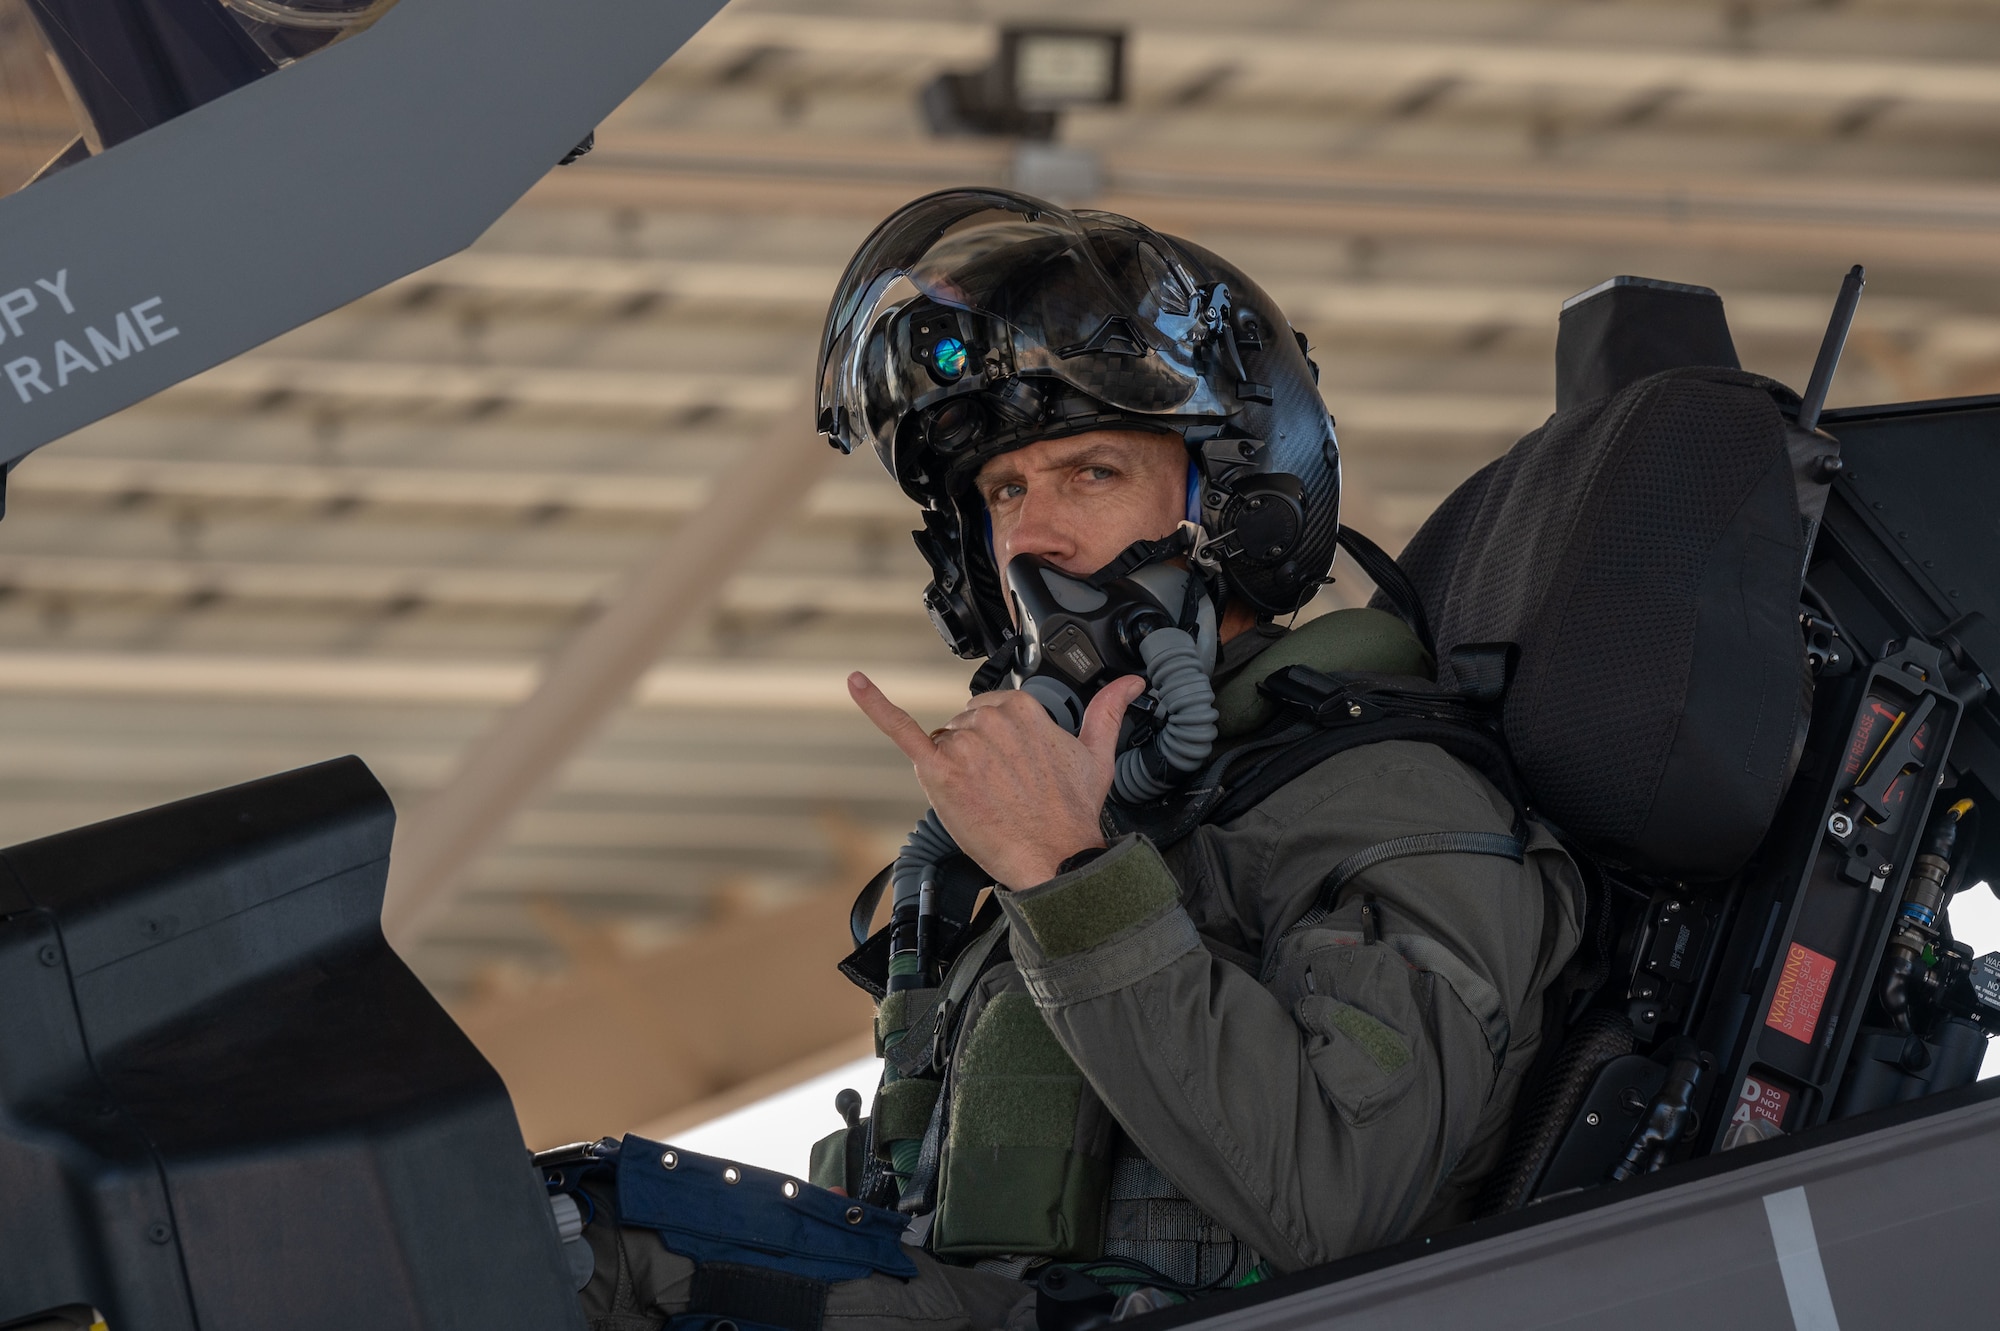 Brig. Gen. Michael Rawls, Air Force Operational Test and Evaluation Center (AFOTEC) commander, prepares for takeoff in an F-35A Lightning II at Nellis Air Force Base, Nevada, Jan. 12, 2023. As a key leader of the test and evaluation community, Brig. Gen. Rawls coordinates directly with the offices of the Secretary of Defense and Department of the Air Force while executing realistic, objective and impartial operational testing and evaluation of Air Force, Space Force, coalition, and joint warfighting capabilities. (U.S. Air Force photo by Airman 1st Class Jordan McCoy)